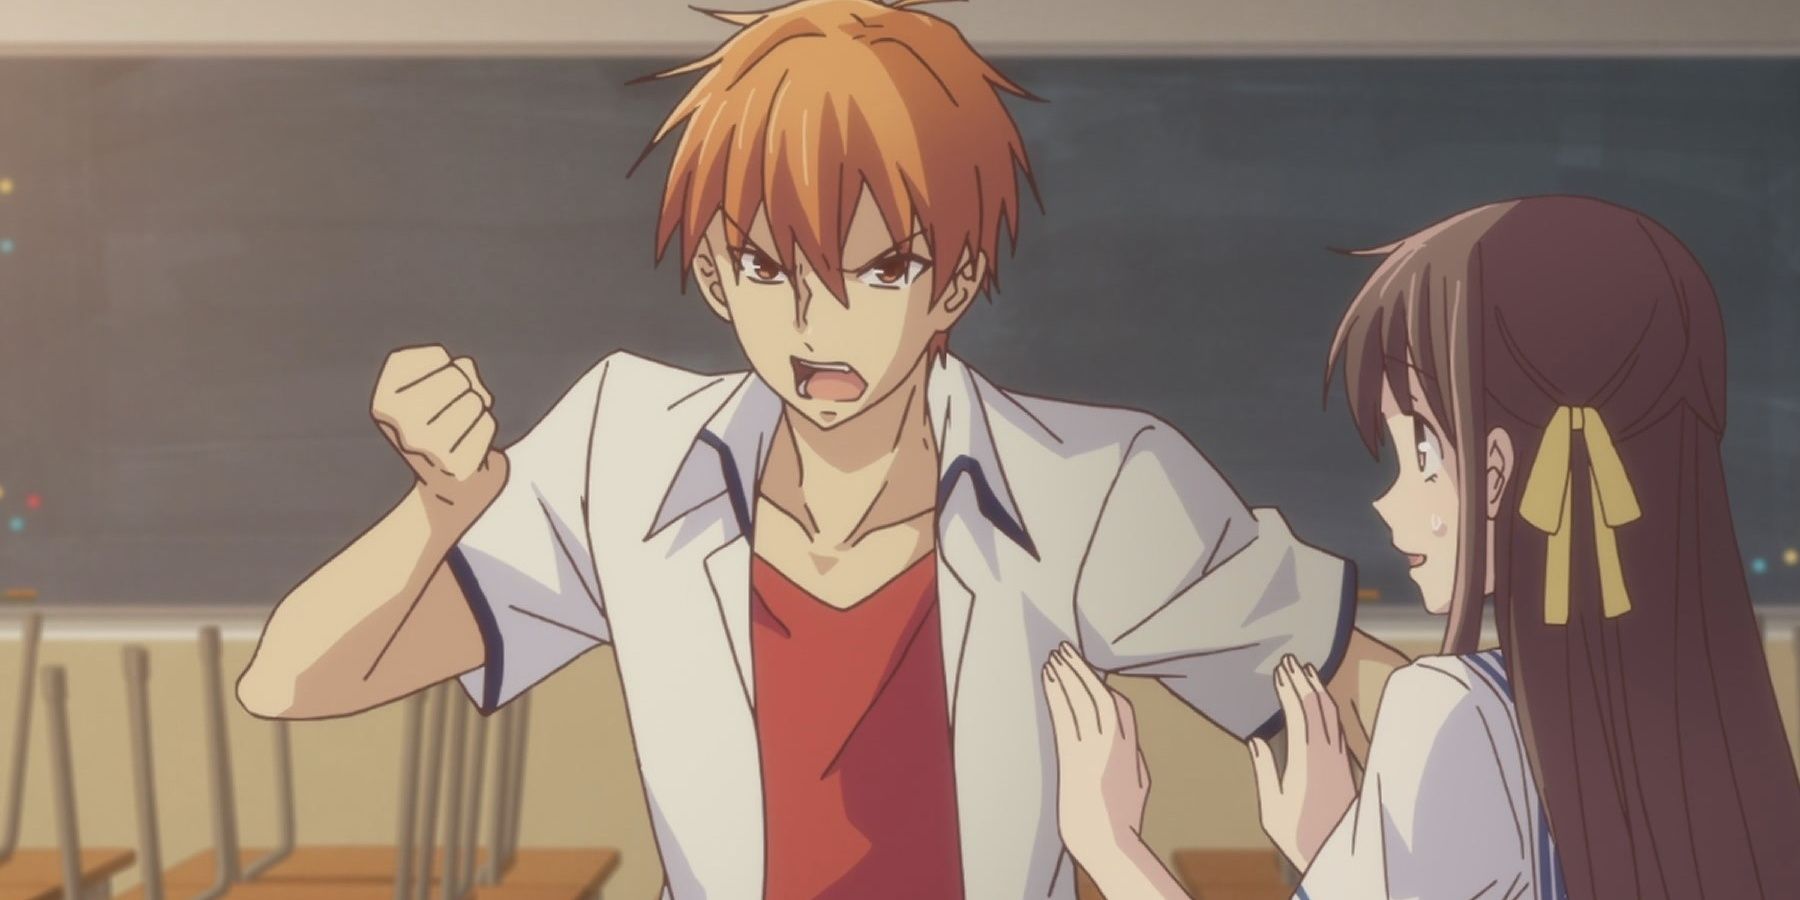 Kyo Sohma looking angry in Fruits Basket and shaking his fist as Tohru tries to calm him. 